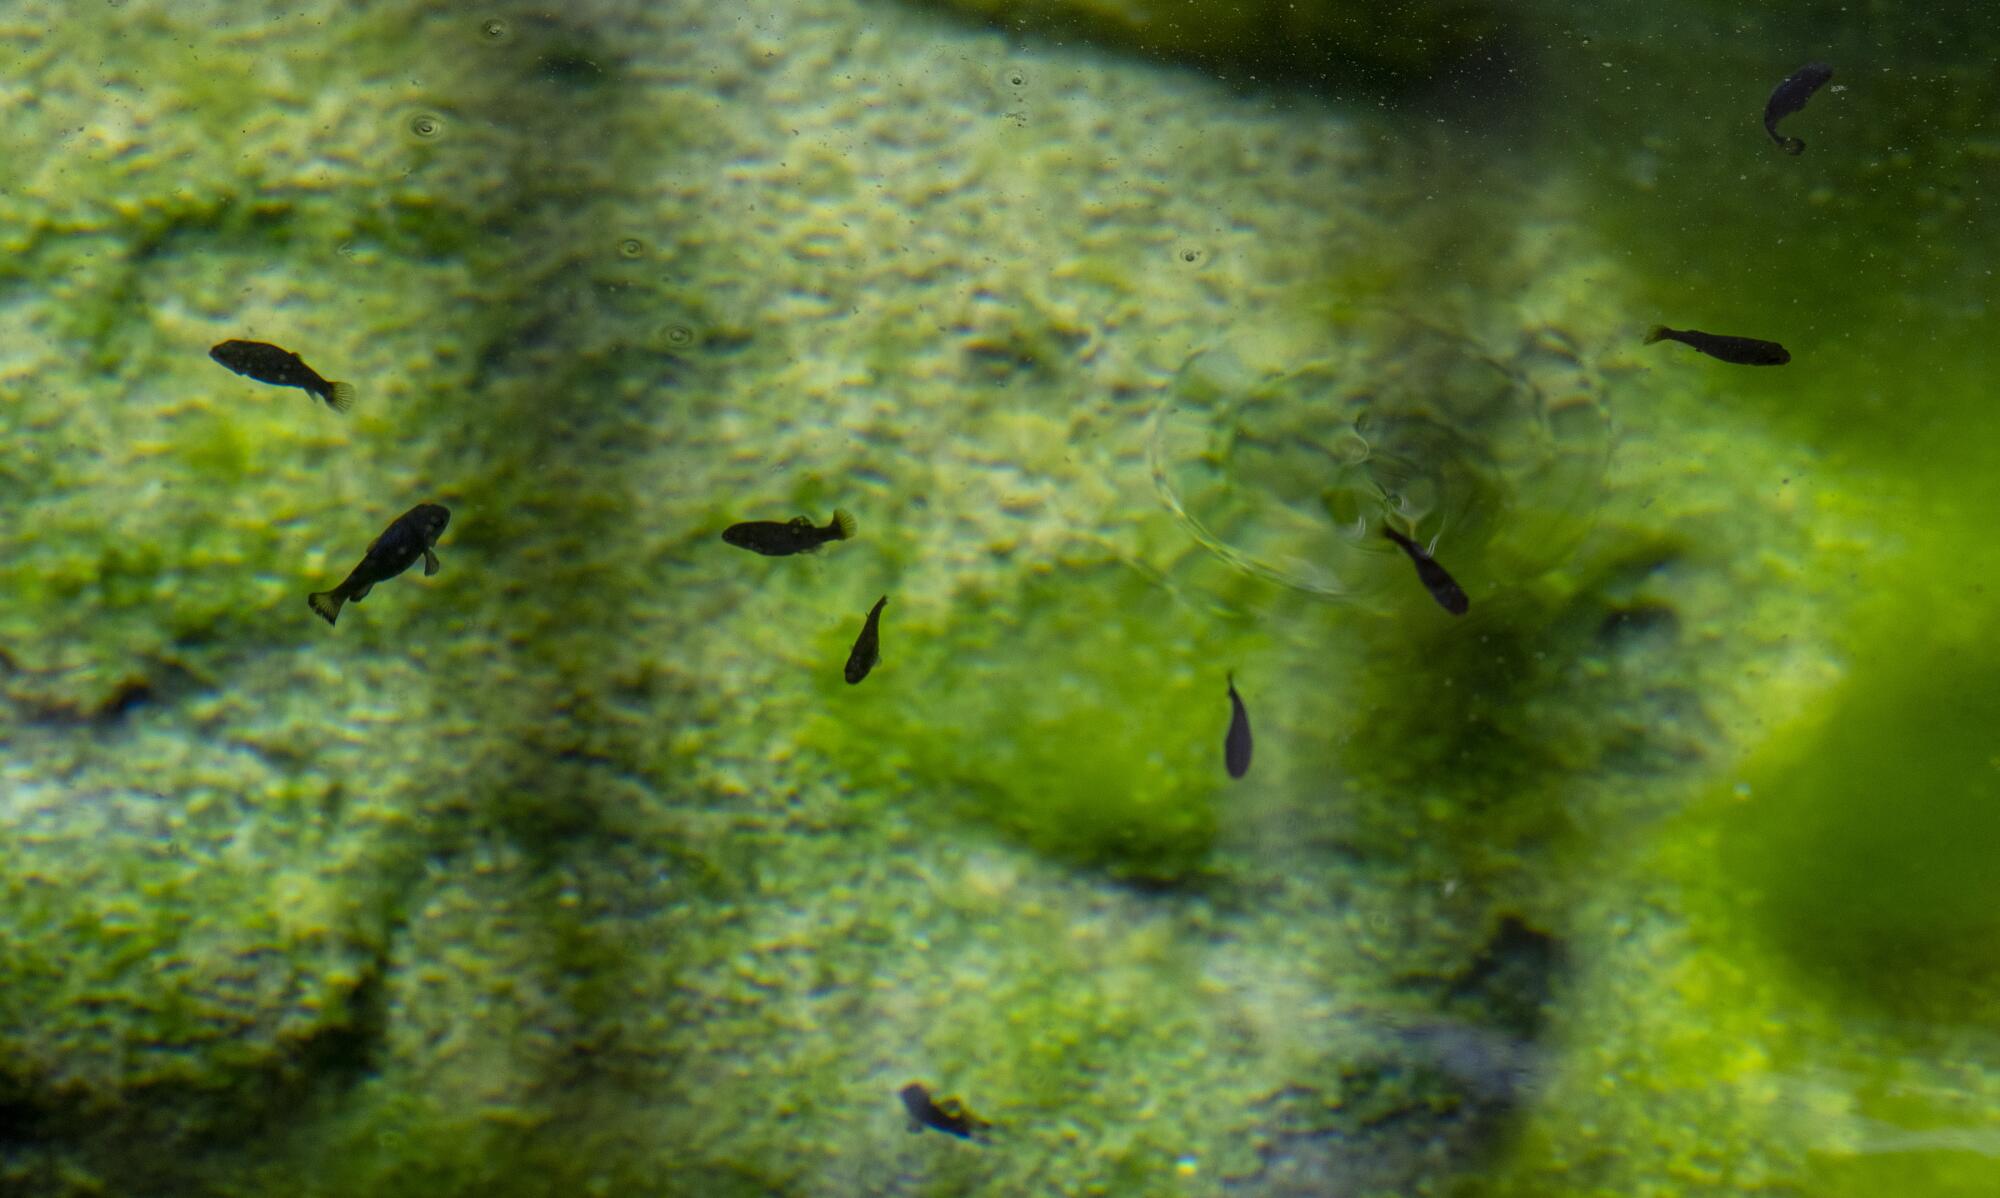 Small fish in green-ish water 